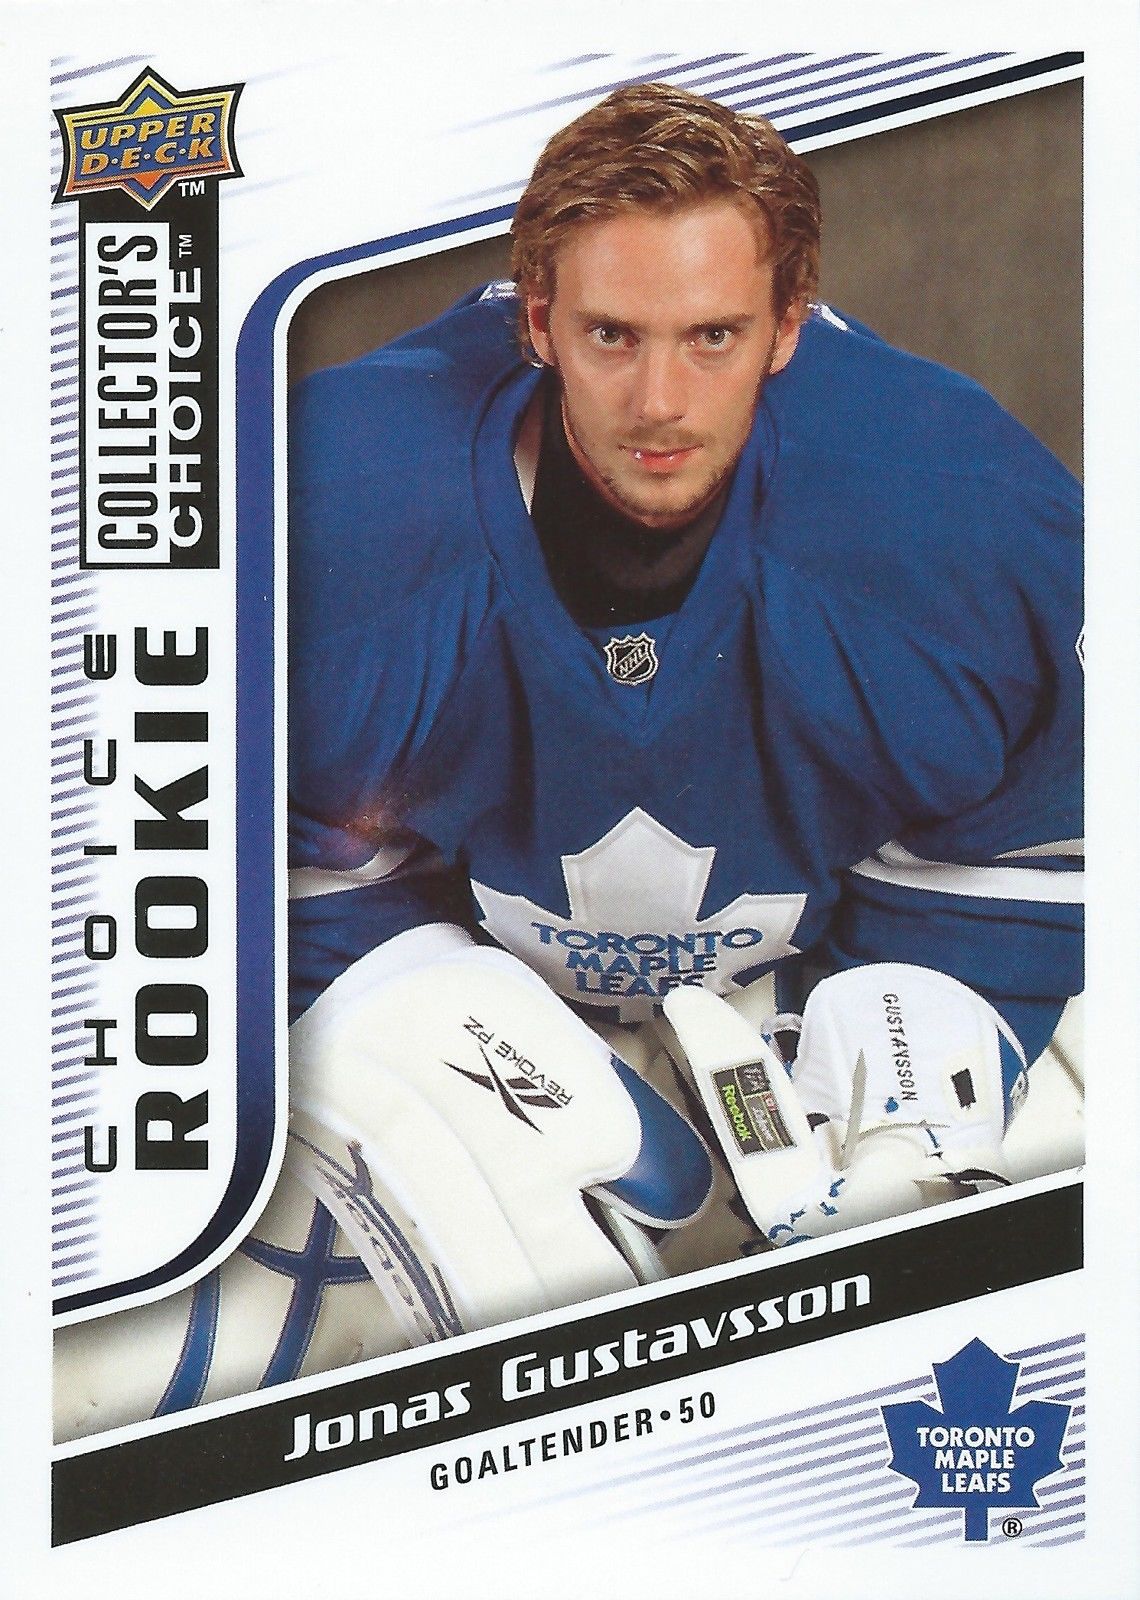  2009-10 Collector's Choice JONAS GUSTAVSSON Rookie RC Maple leafs 01386 Image 1